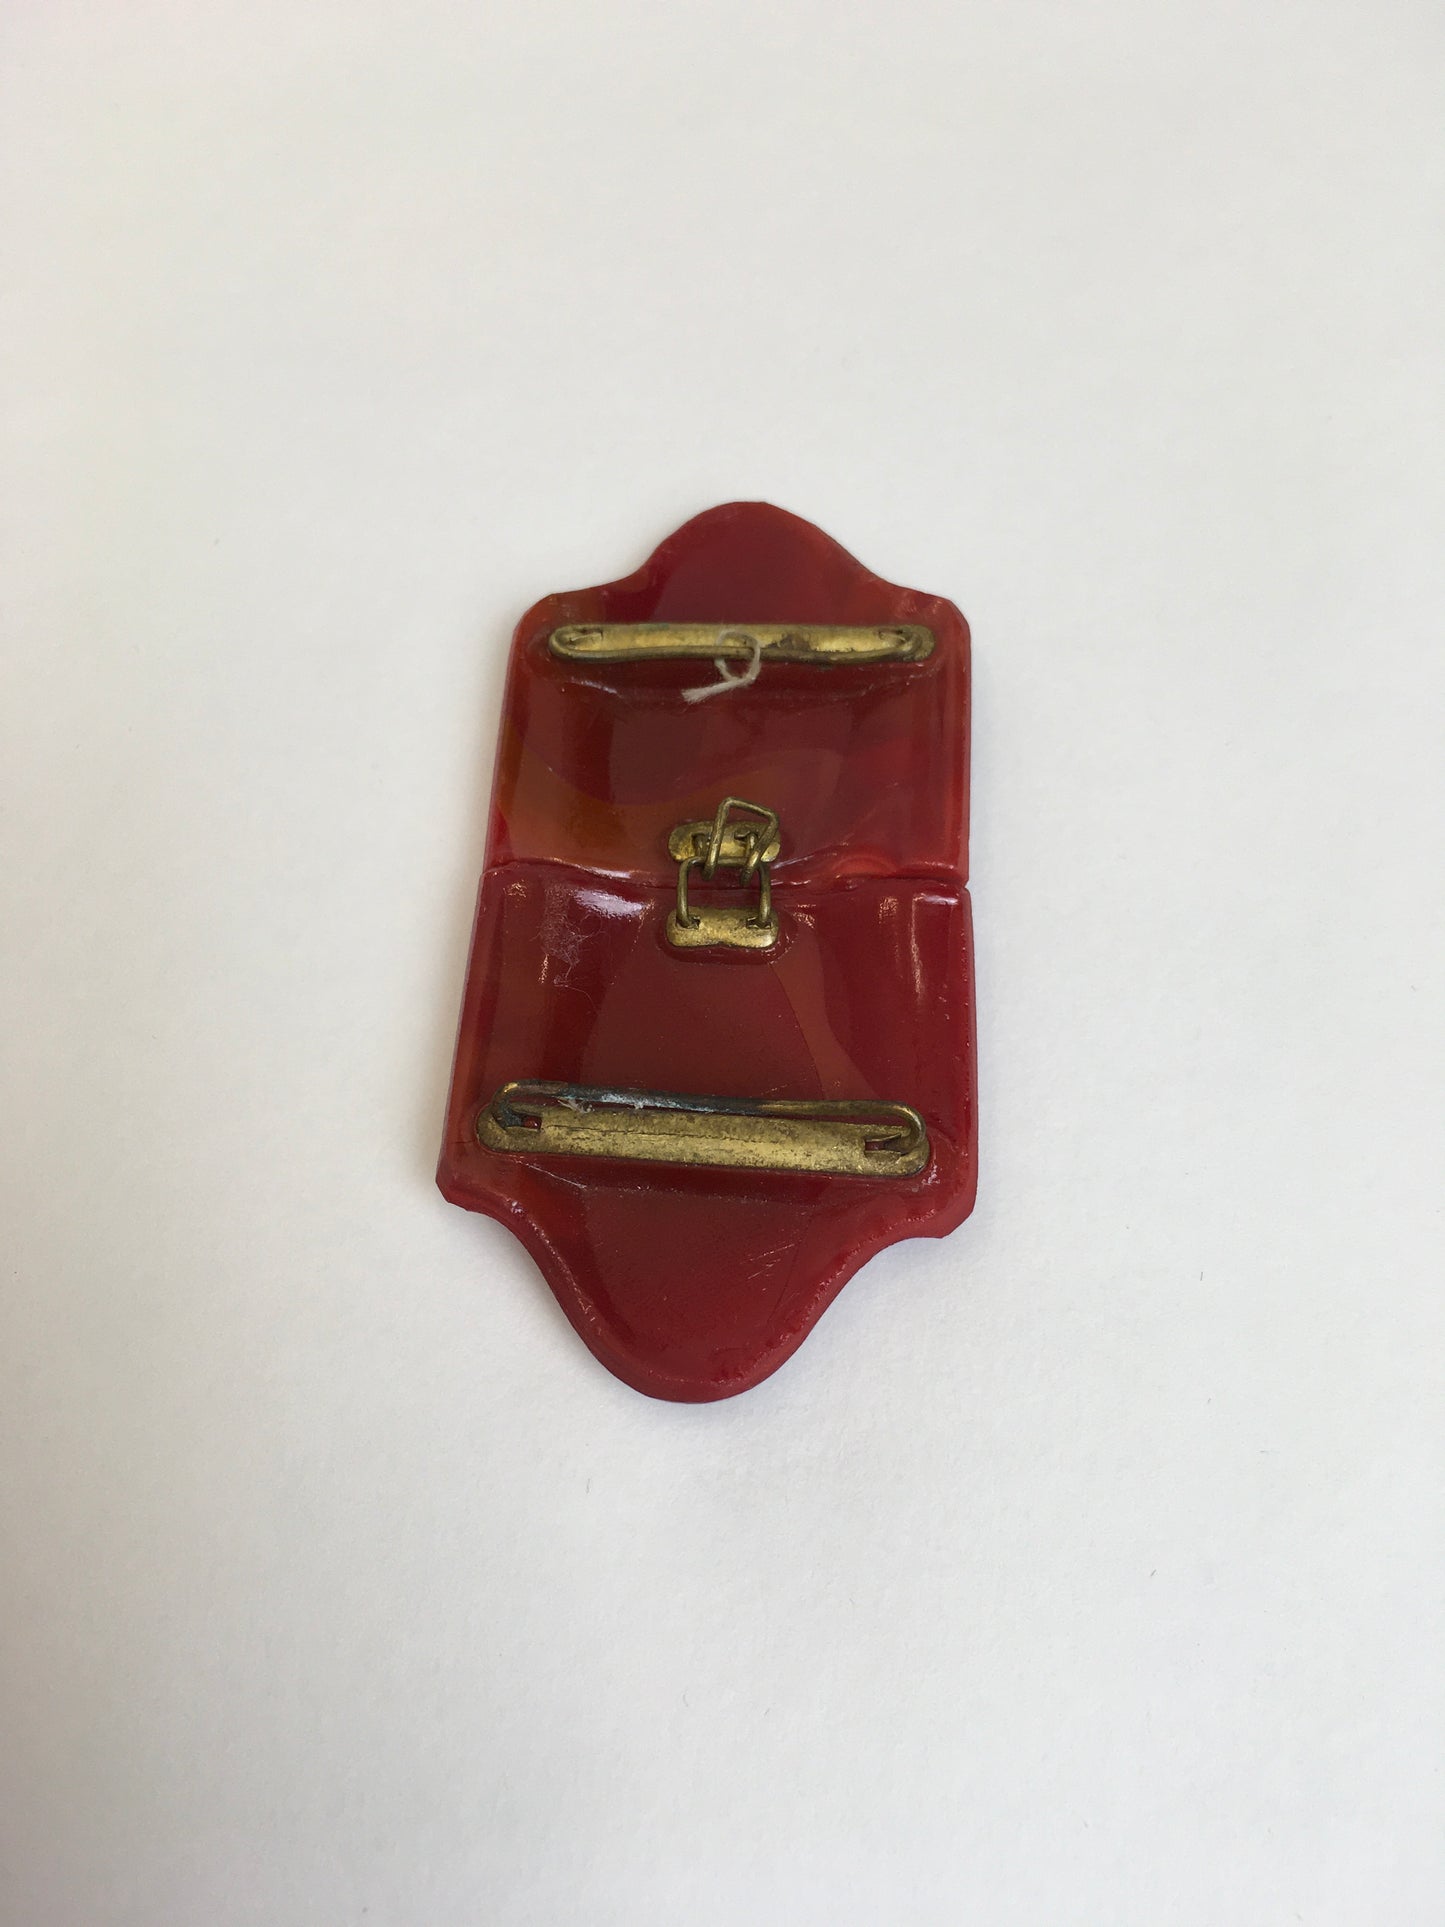 Original 1930’s Art Deco Red Glass Buckle - With Fabulous Detailing